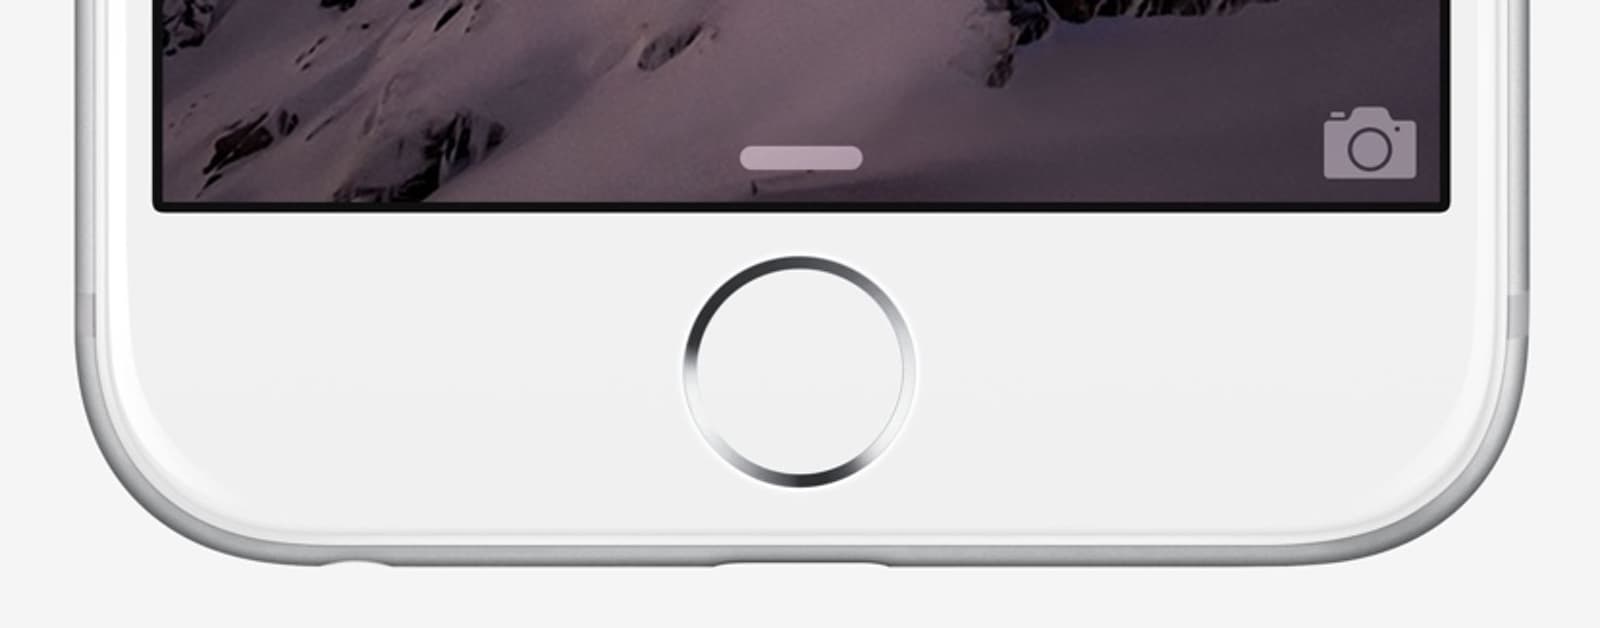 iOS 10: How to Make Home Button Touch ID Work Like it Used to